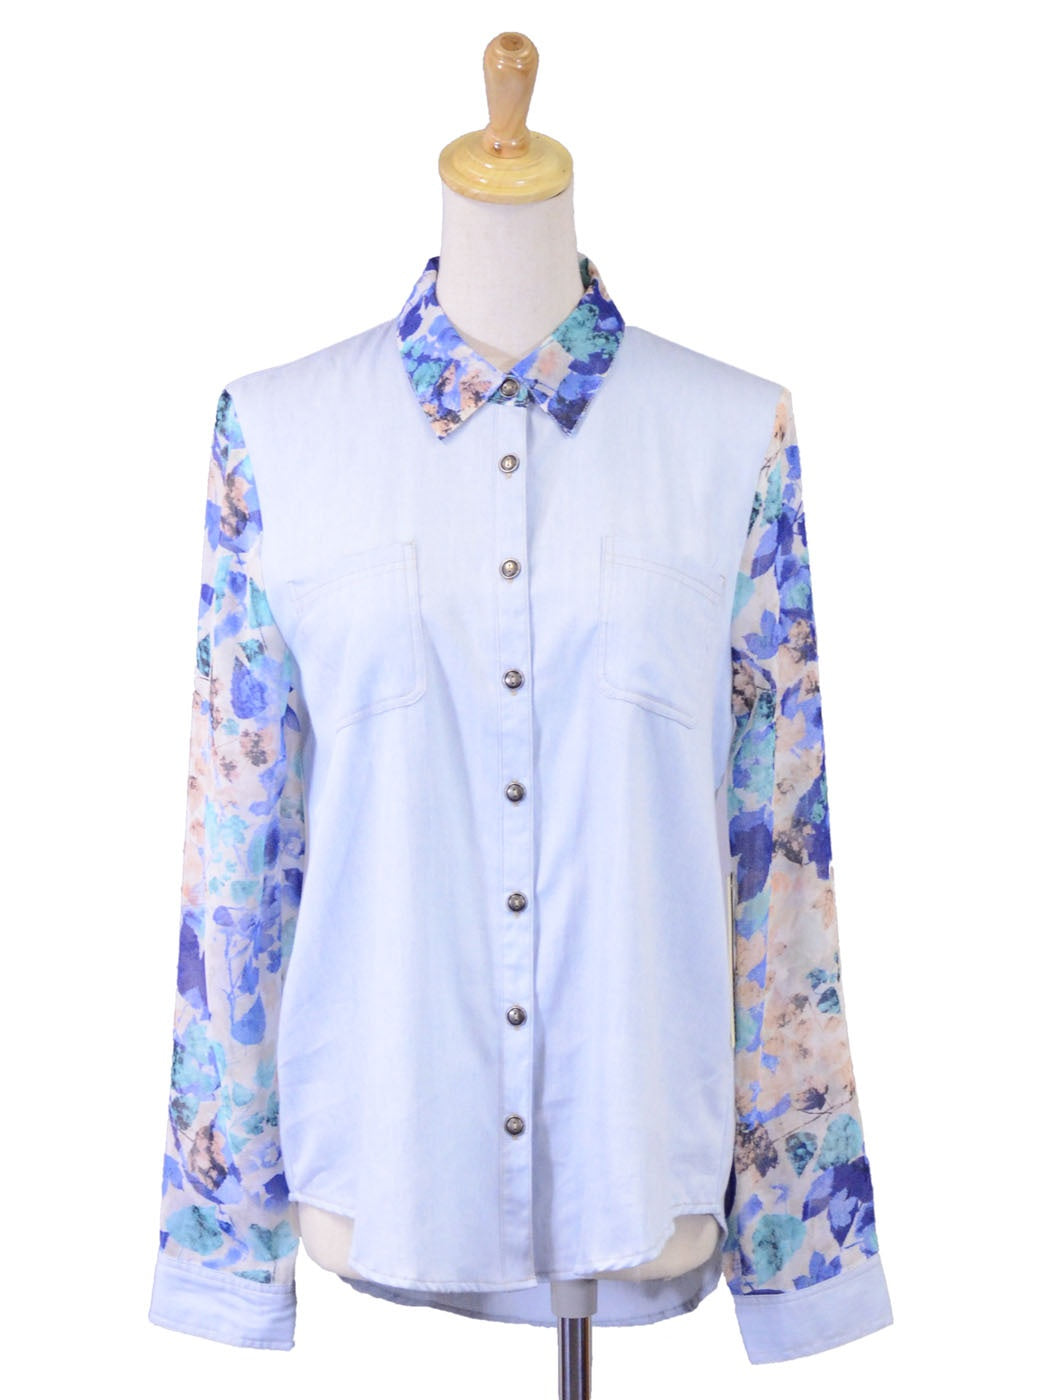 Edgemine Lovely Garden Chambray Long Sleeve Floral Print  Button Down Shirt - ALILANG.COM